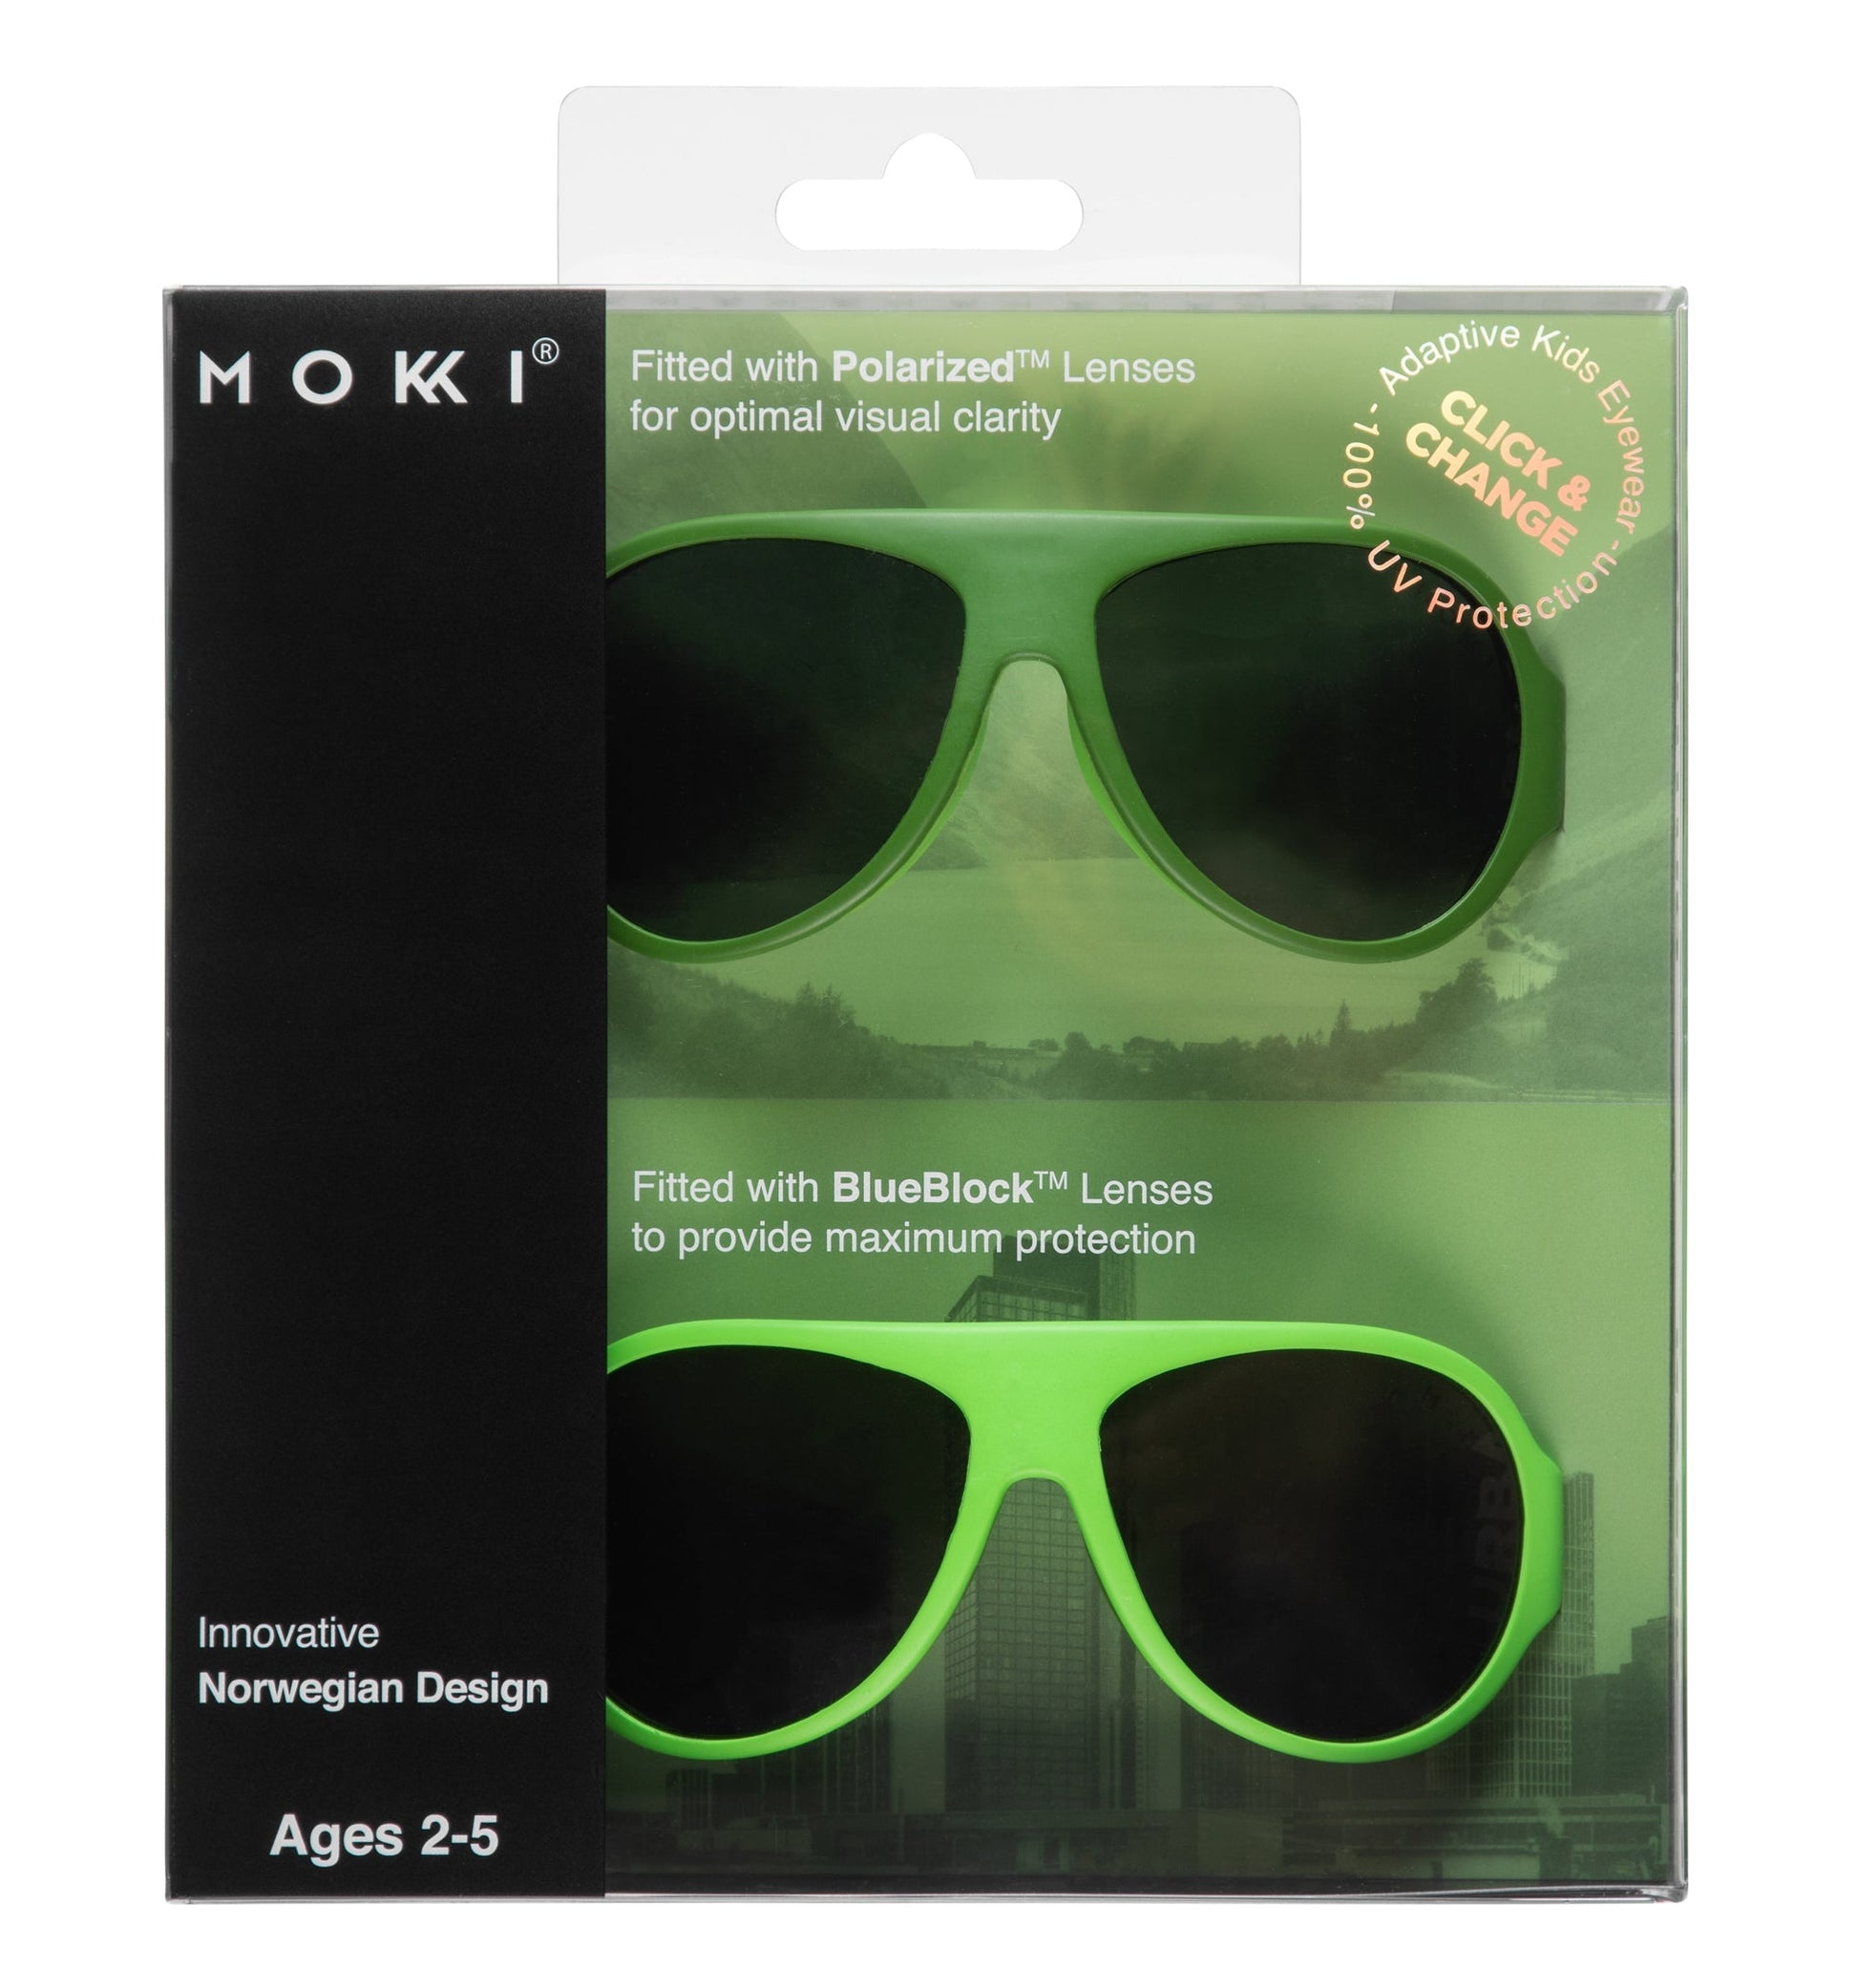 Mokki Click & Change-sunglasses for kids ages 2-5 in green